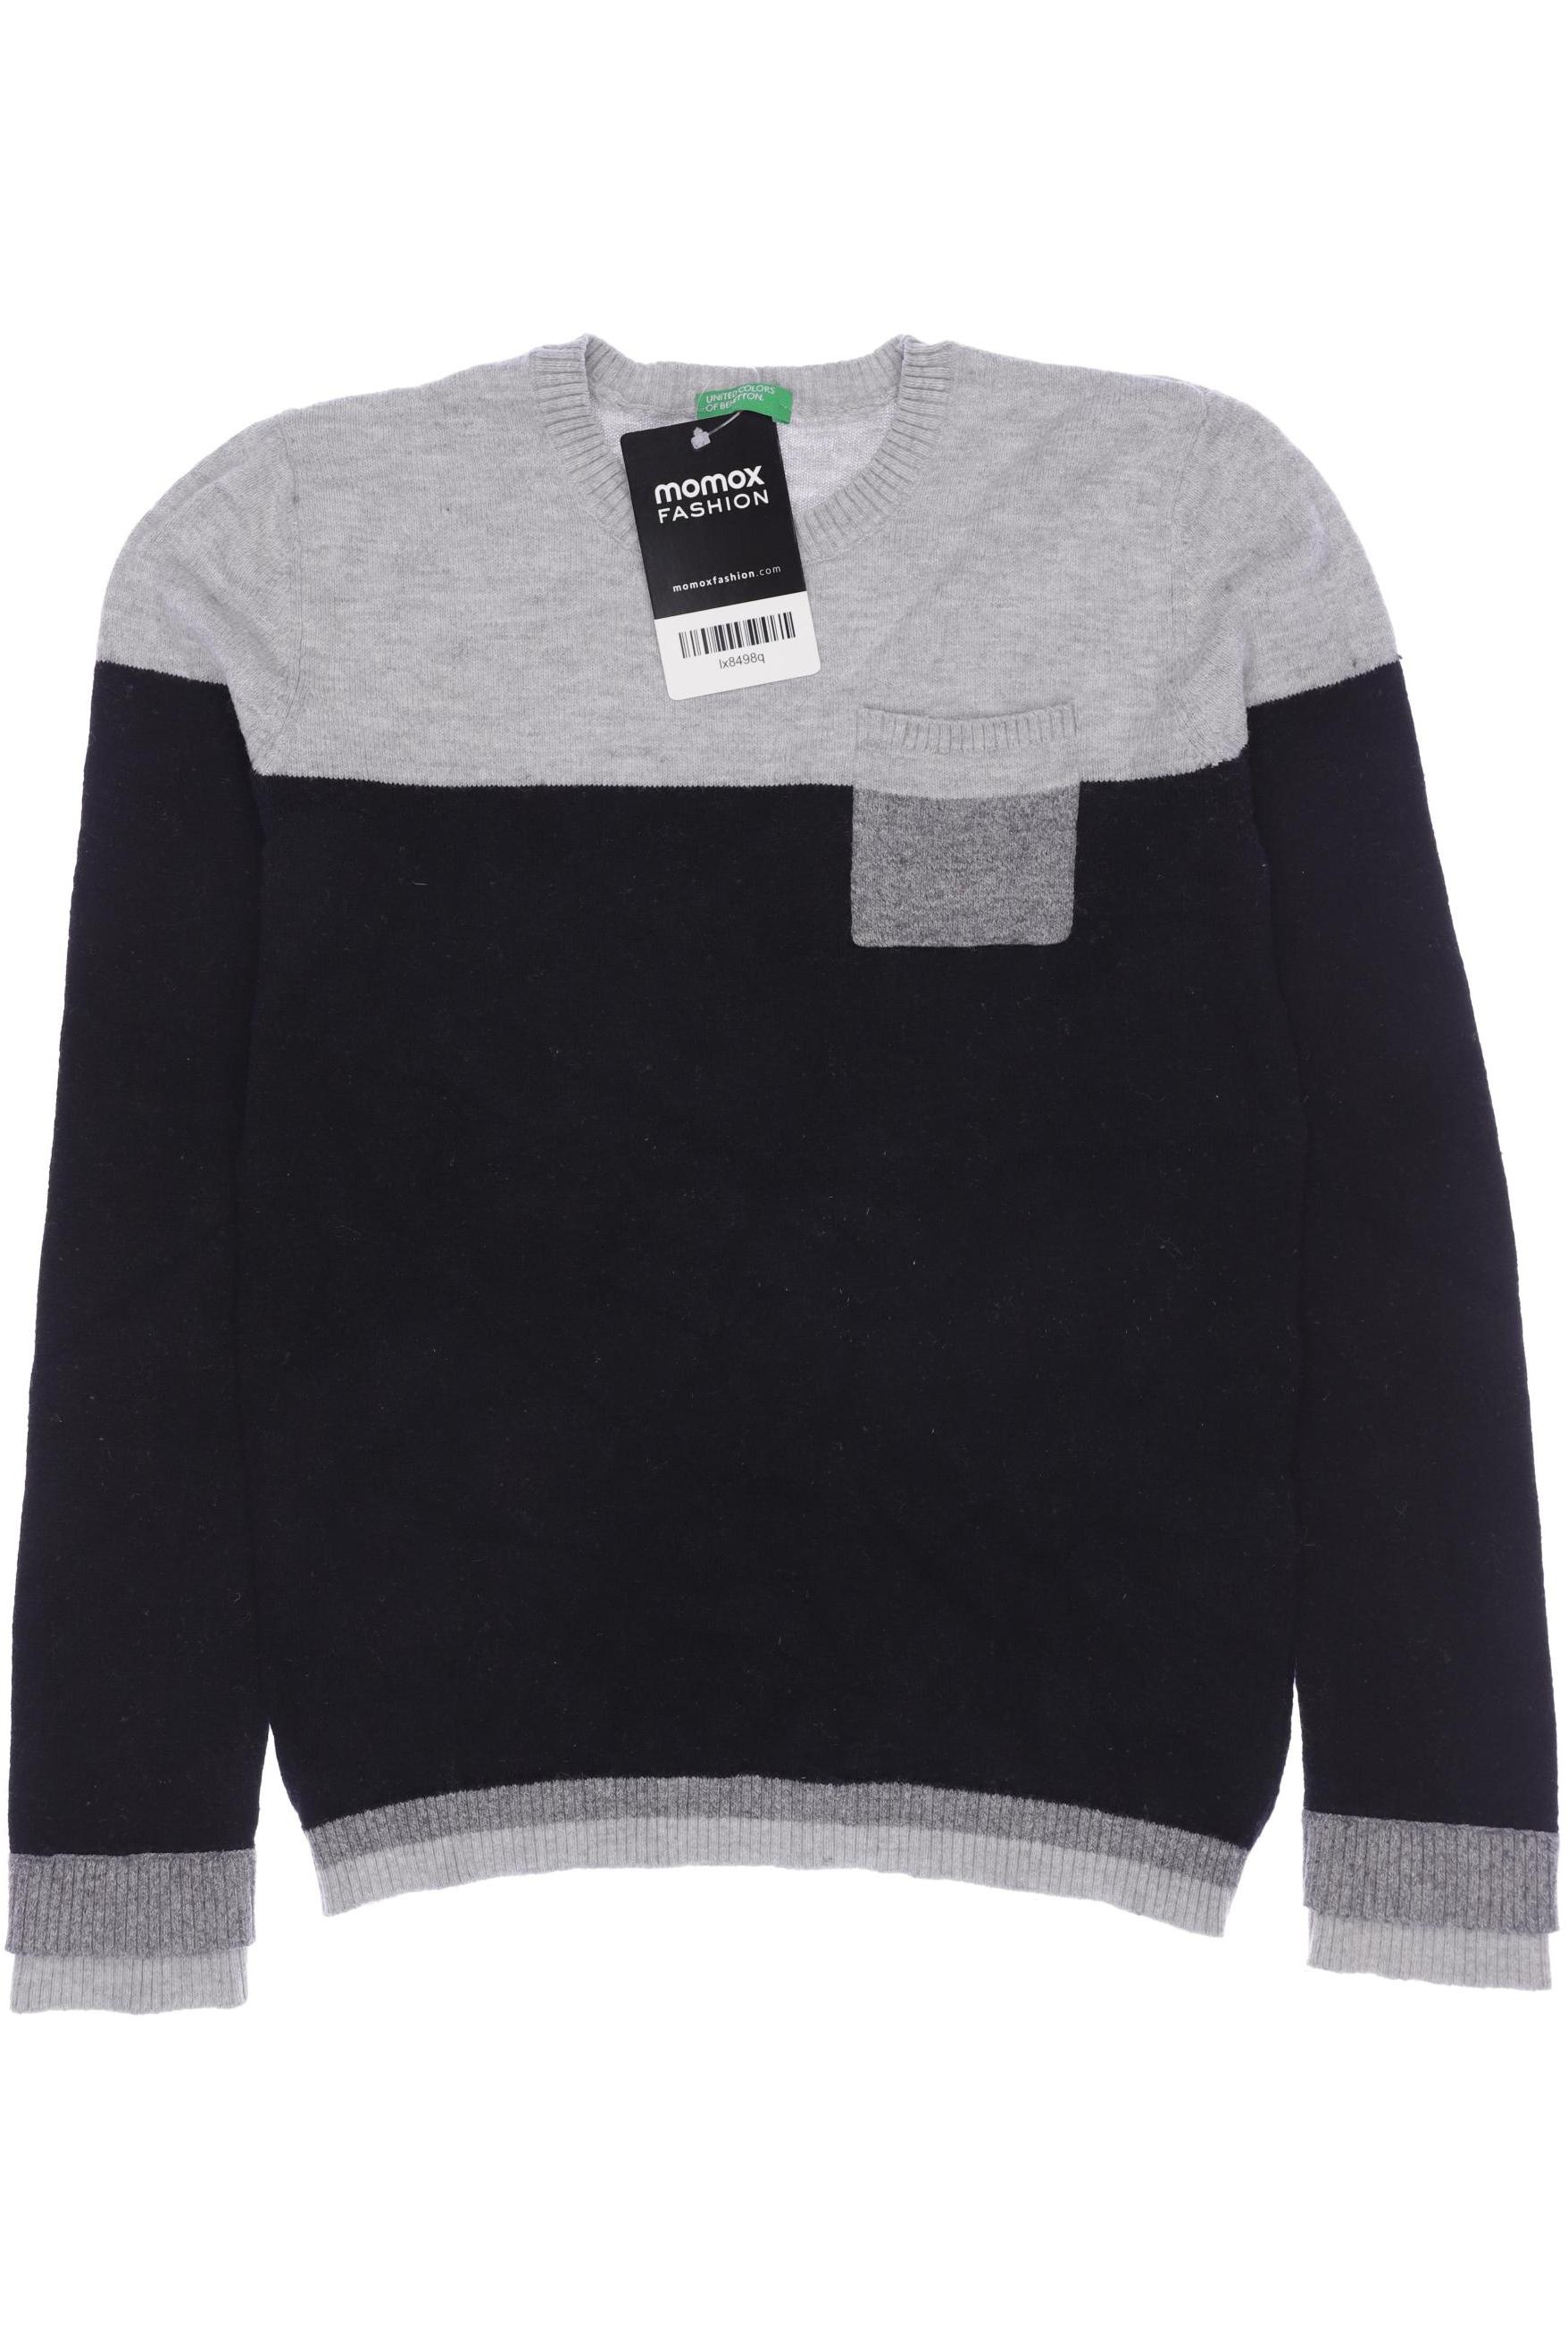 UNITED COLORS OF BENETTON Jungen Pullover, grau von United Colors of Benetton